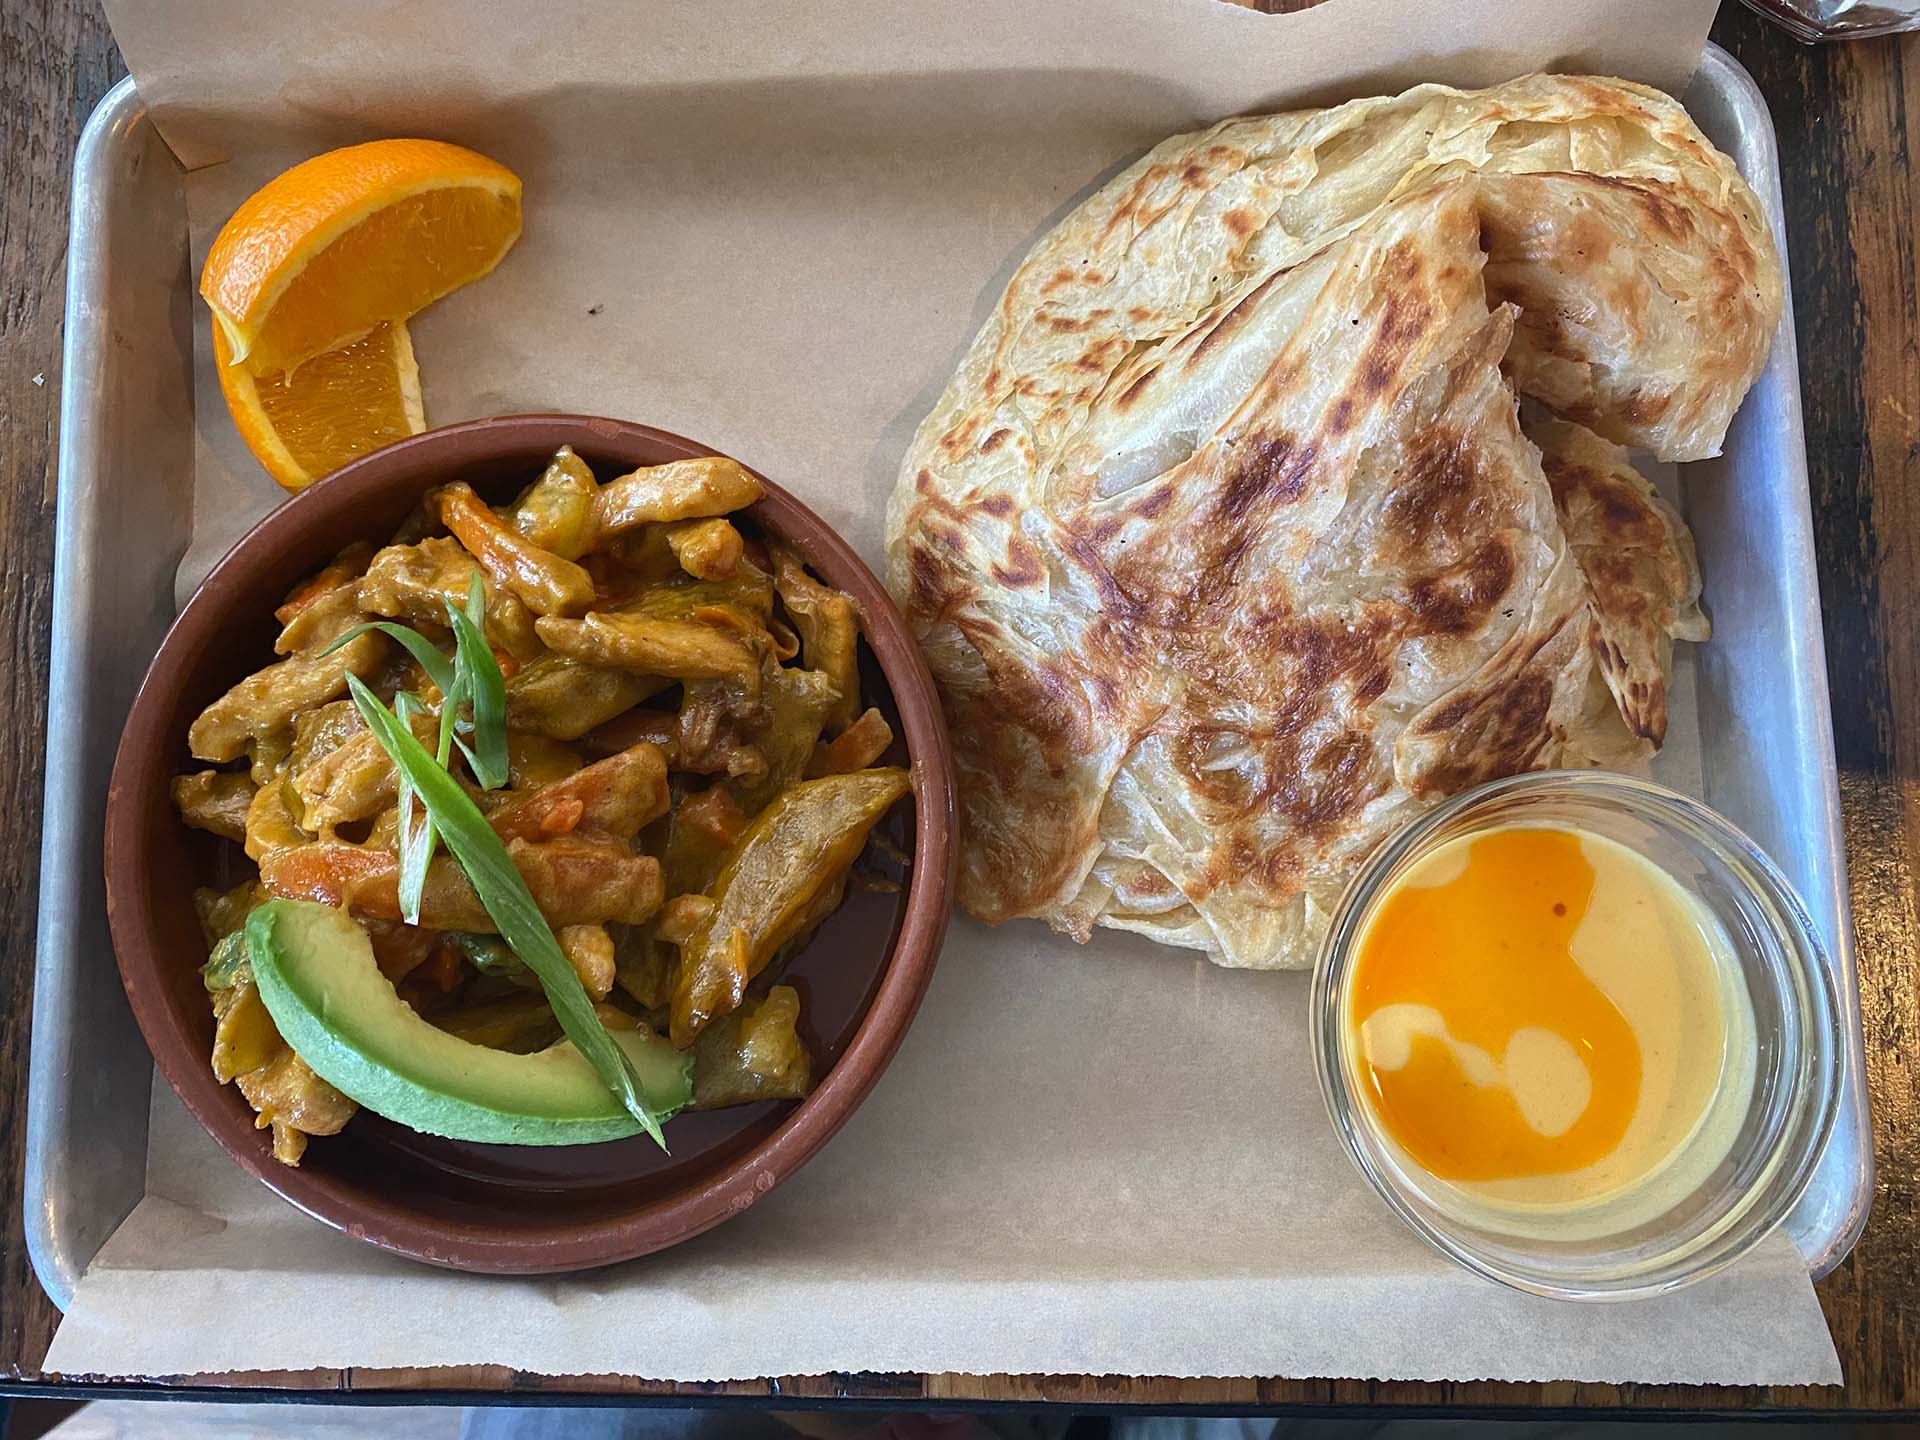 Crispy, flaky roti (Malaysian flatbread) served alongside a bowl of curried chicken and root vegetables on a paper-lined metal tray.